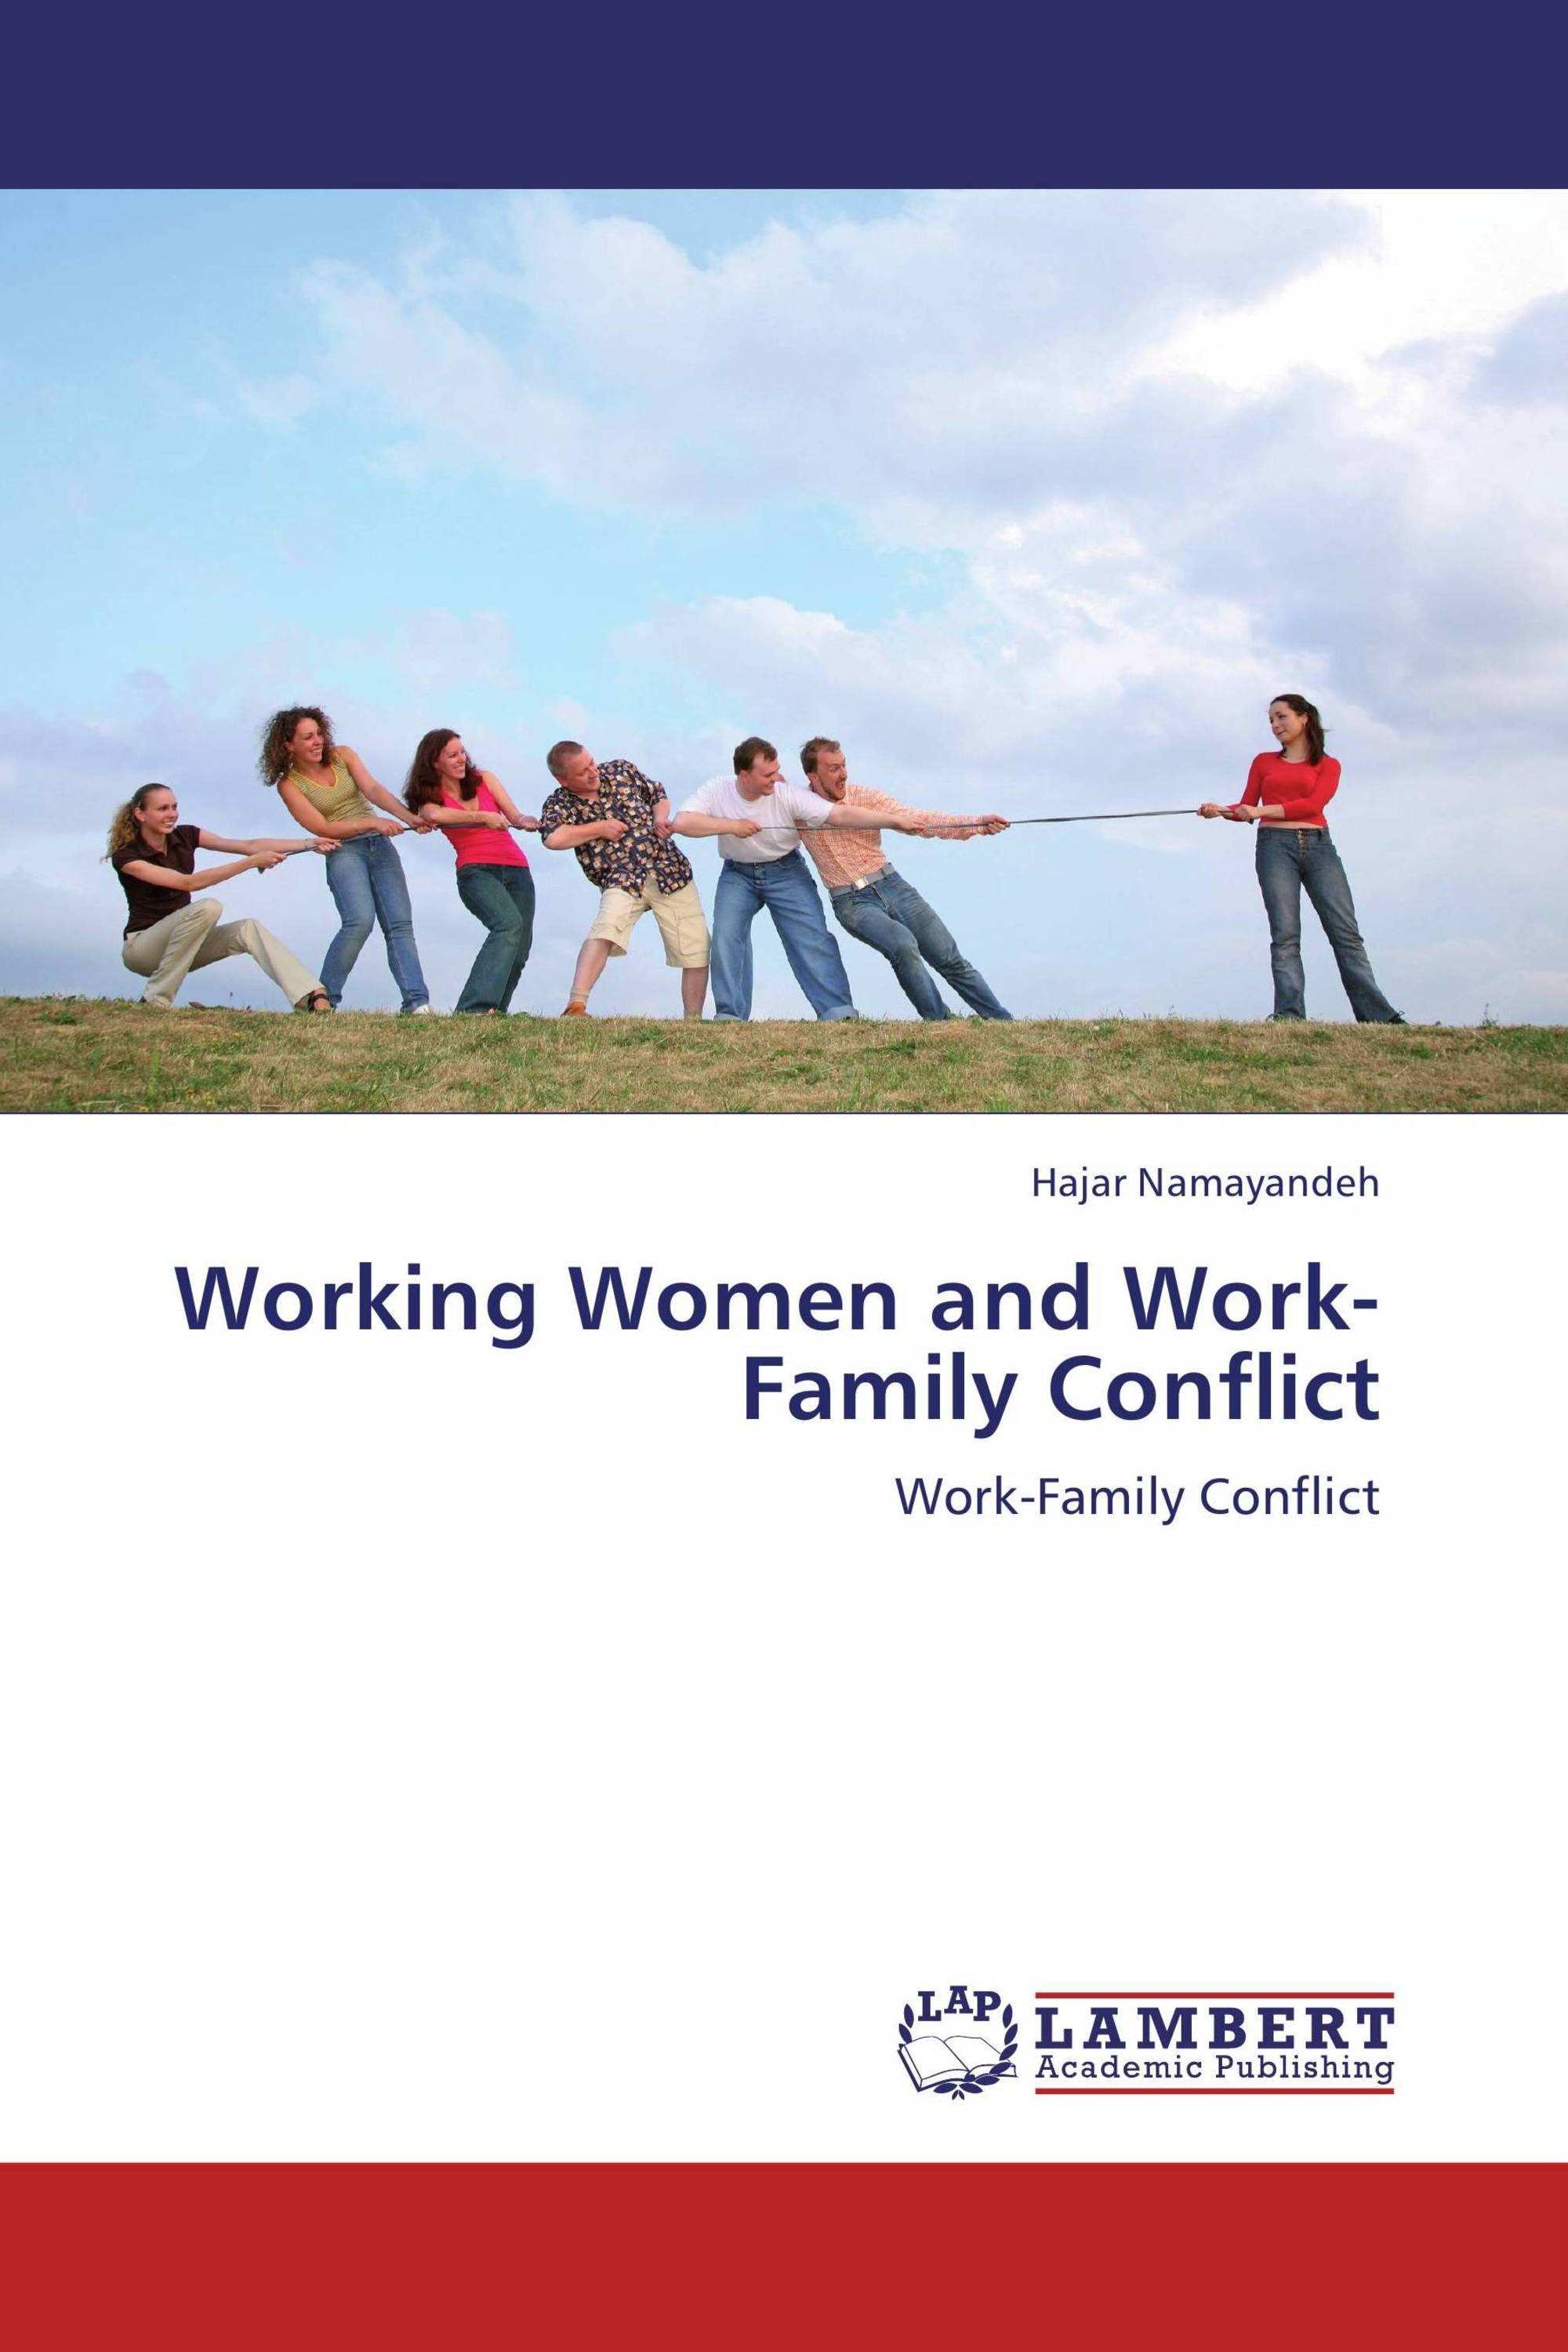 master thesis work family conflict